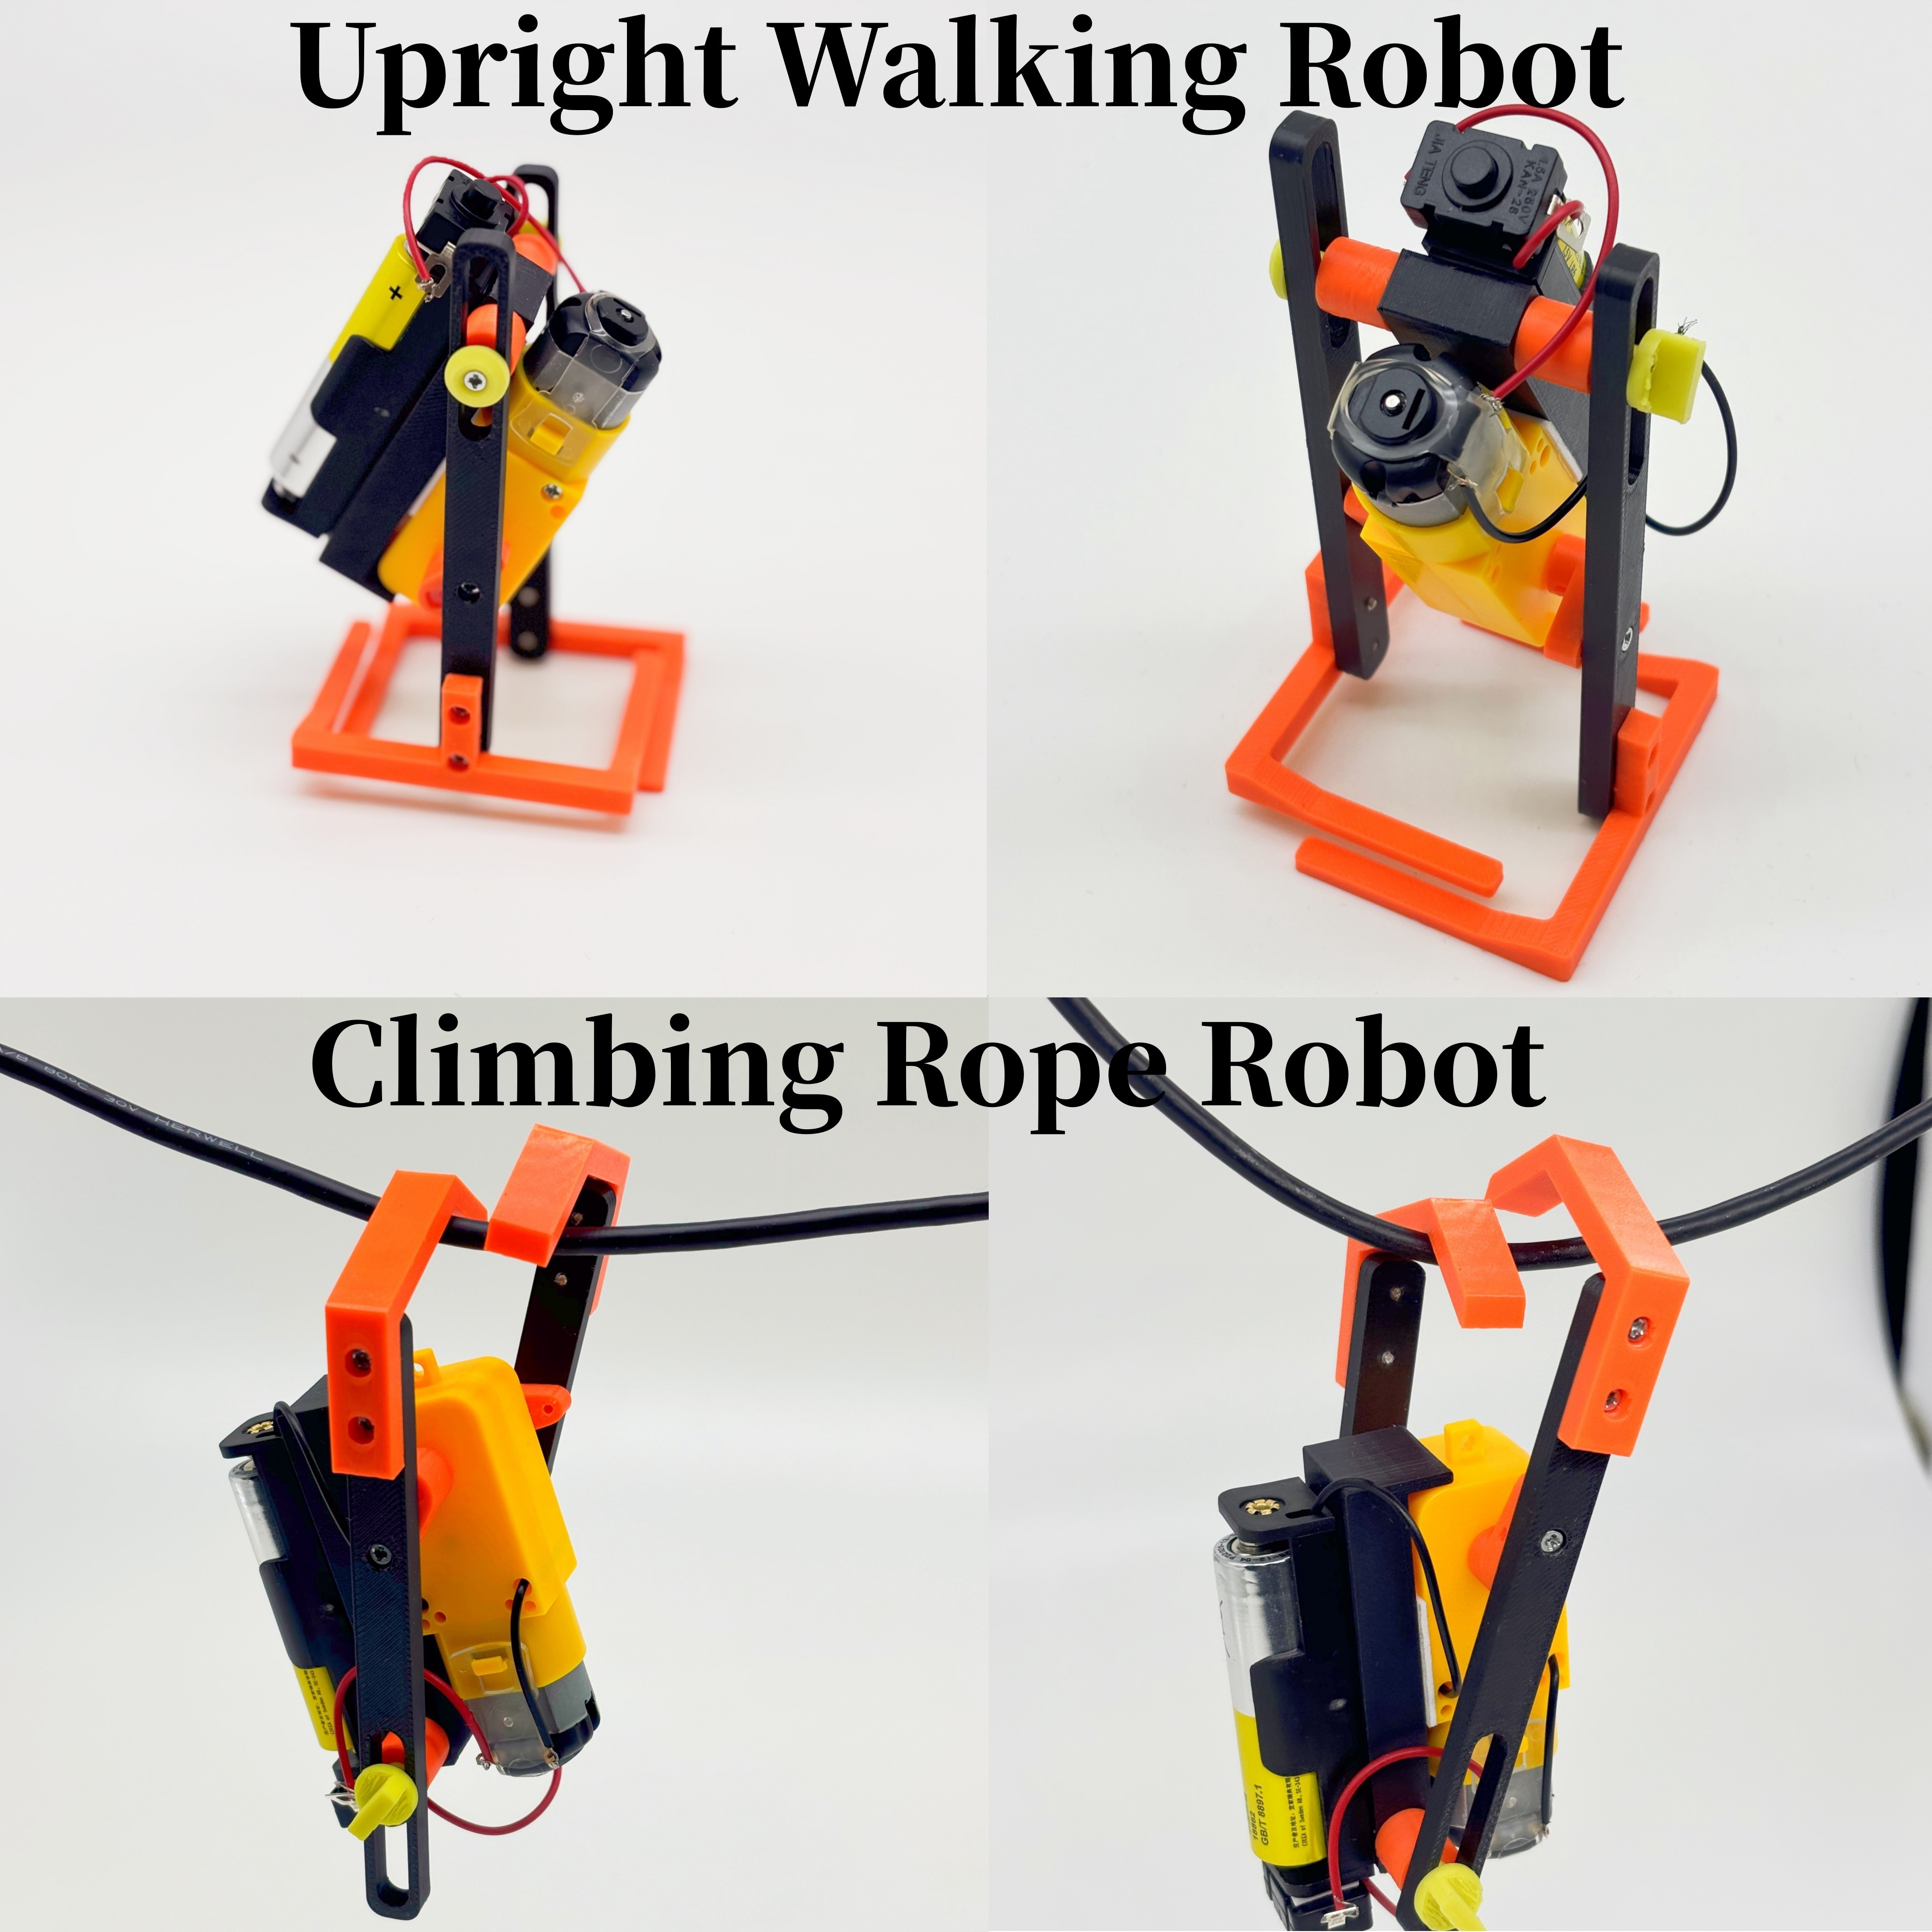 

Diy Kit For Crafting A Small Motorized Walking Robot And Climbing Rope Robot Toy With Handmade Models, Using